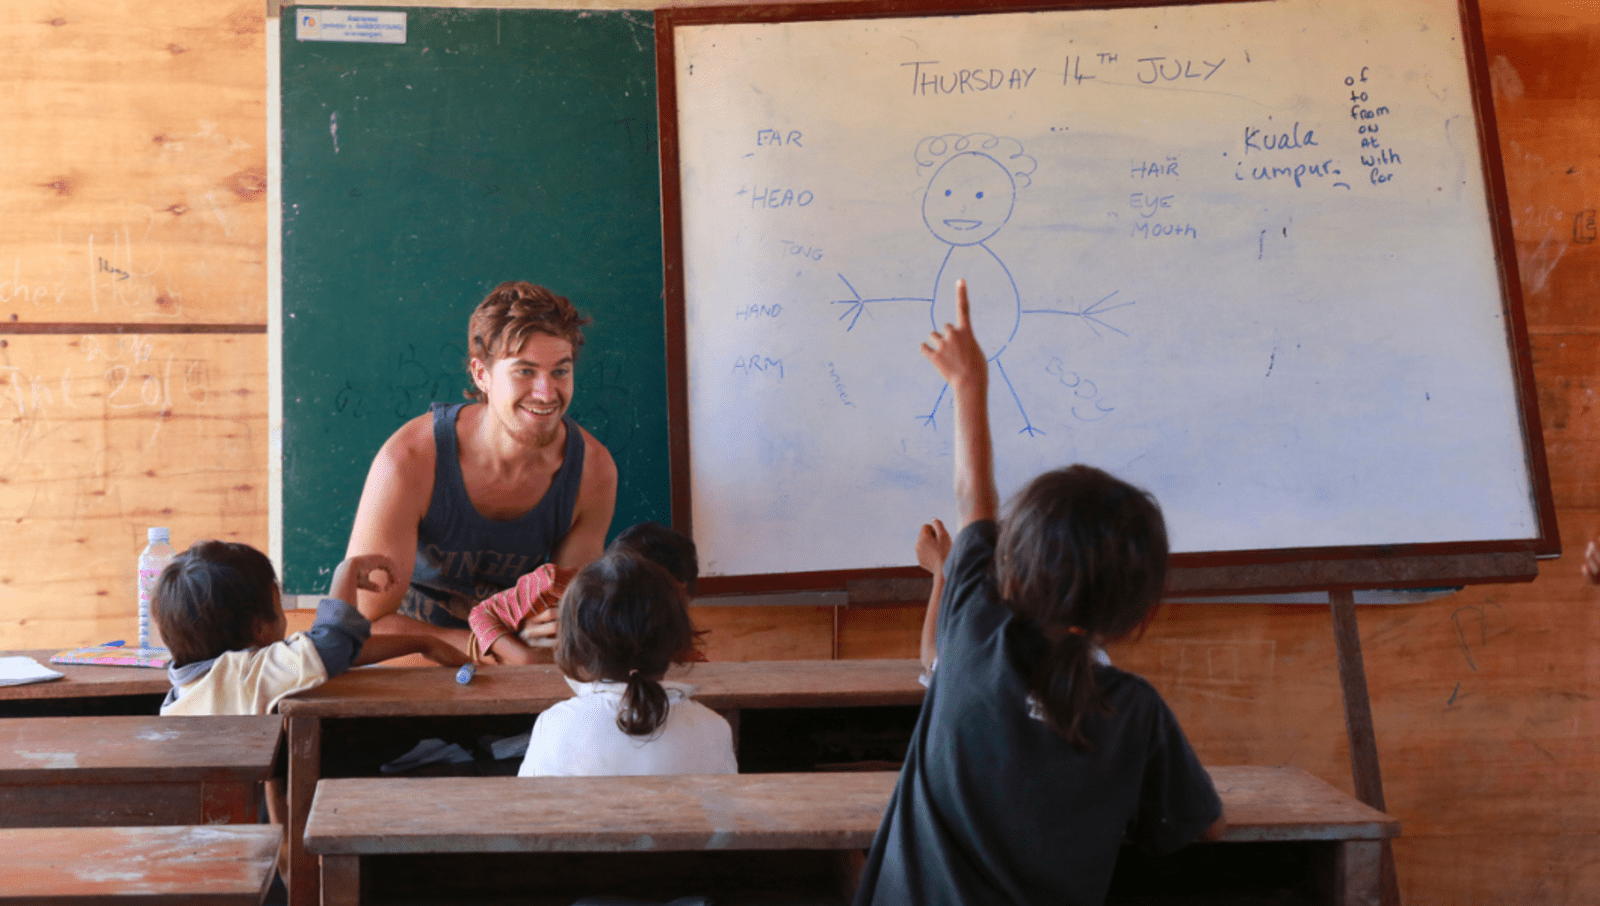 Man teaching to 3 young children with whiteboard with drawings in background